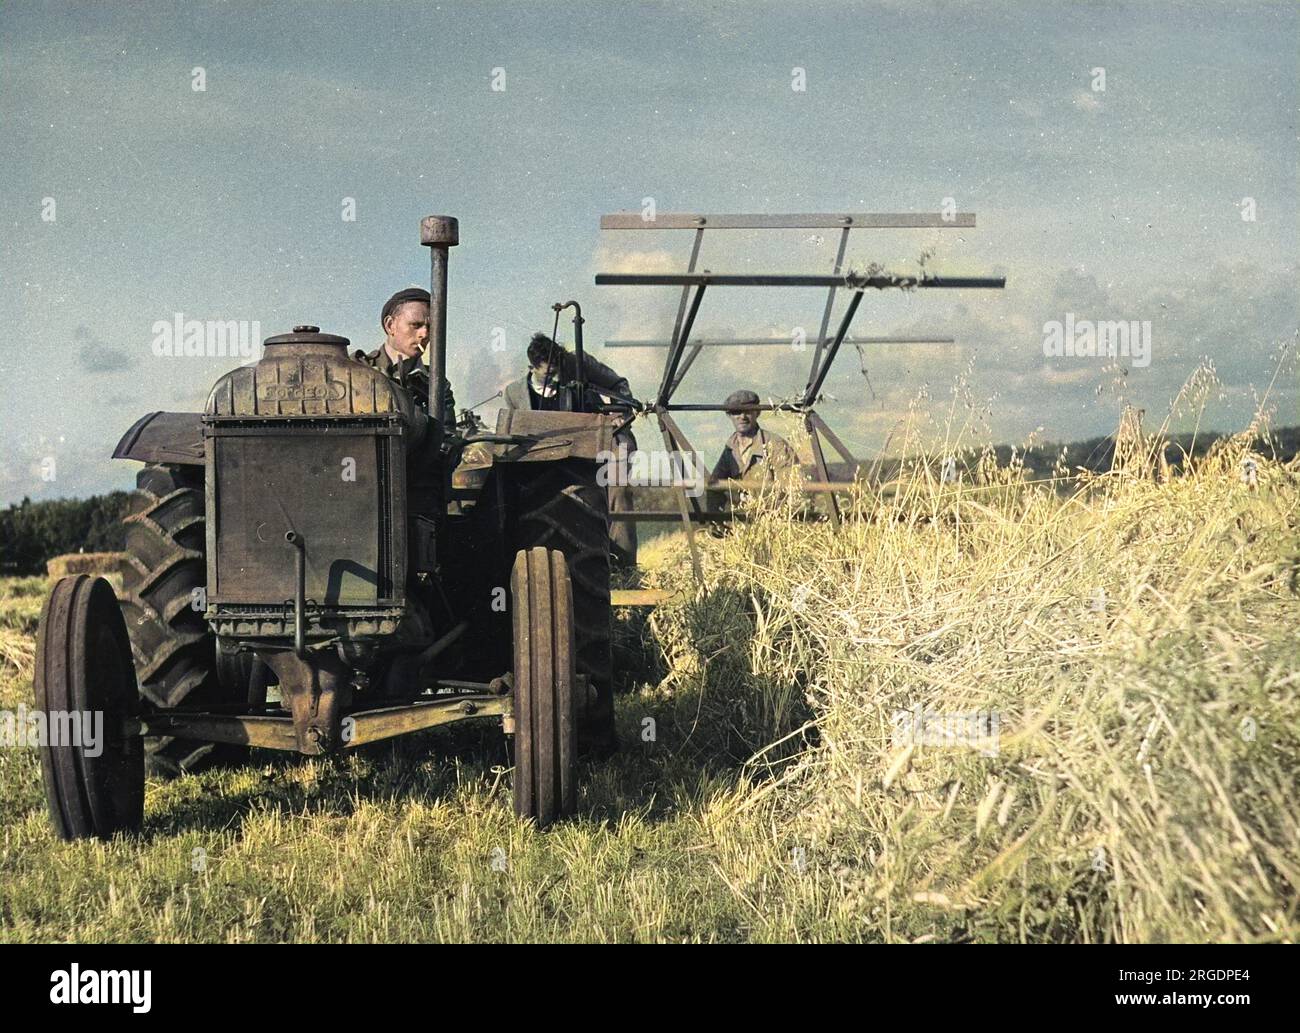 A farmer in his tractor, cutting a crop of oats and peas, the crop having badly fallen owing to the weight of the pea harvest. Stock Photo